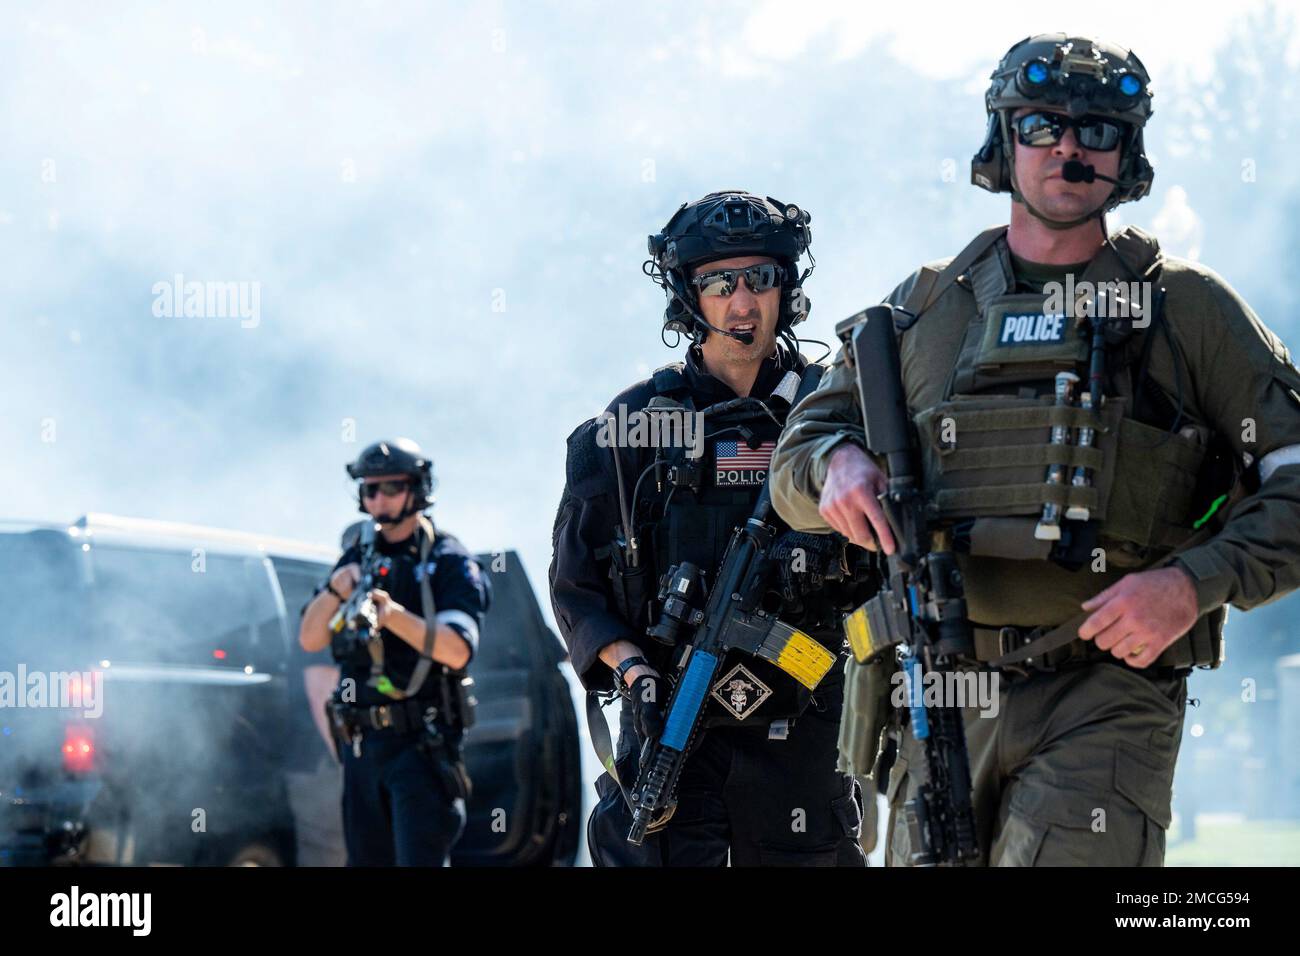 Members of the U.S. Secret Service, New York Police Department Emergency Services Unit, Port Authority Police Department, Federal Bureau of Investigations Special Weapons and Tactics, U.S. Customs and Border Protection Air and Marine Operations, U.S. State Department Diplomatic Security Services and the United Nations Department of Safety and Security Emergency Response Unit, participate in a joint training exercise in preparation for the 77th Session of the United Nations General Assembly at the James J. Rowley Training Center in Laurel, MD, June 30, 2022. Stock Photo